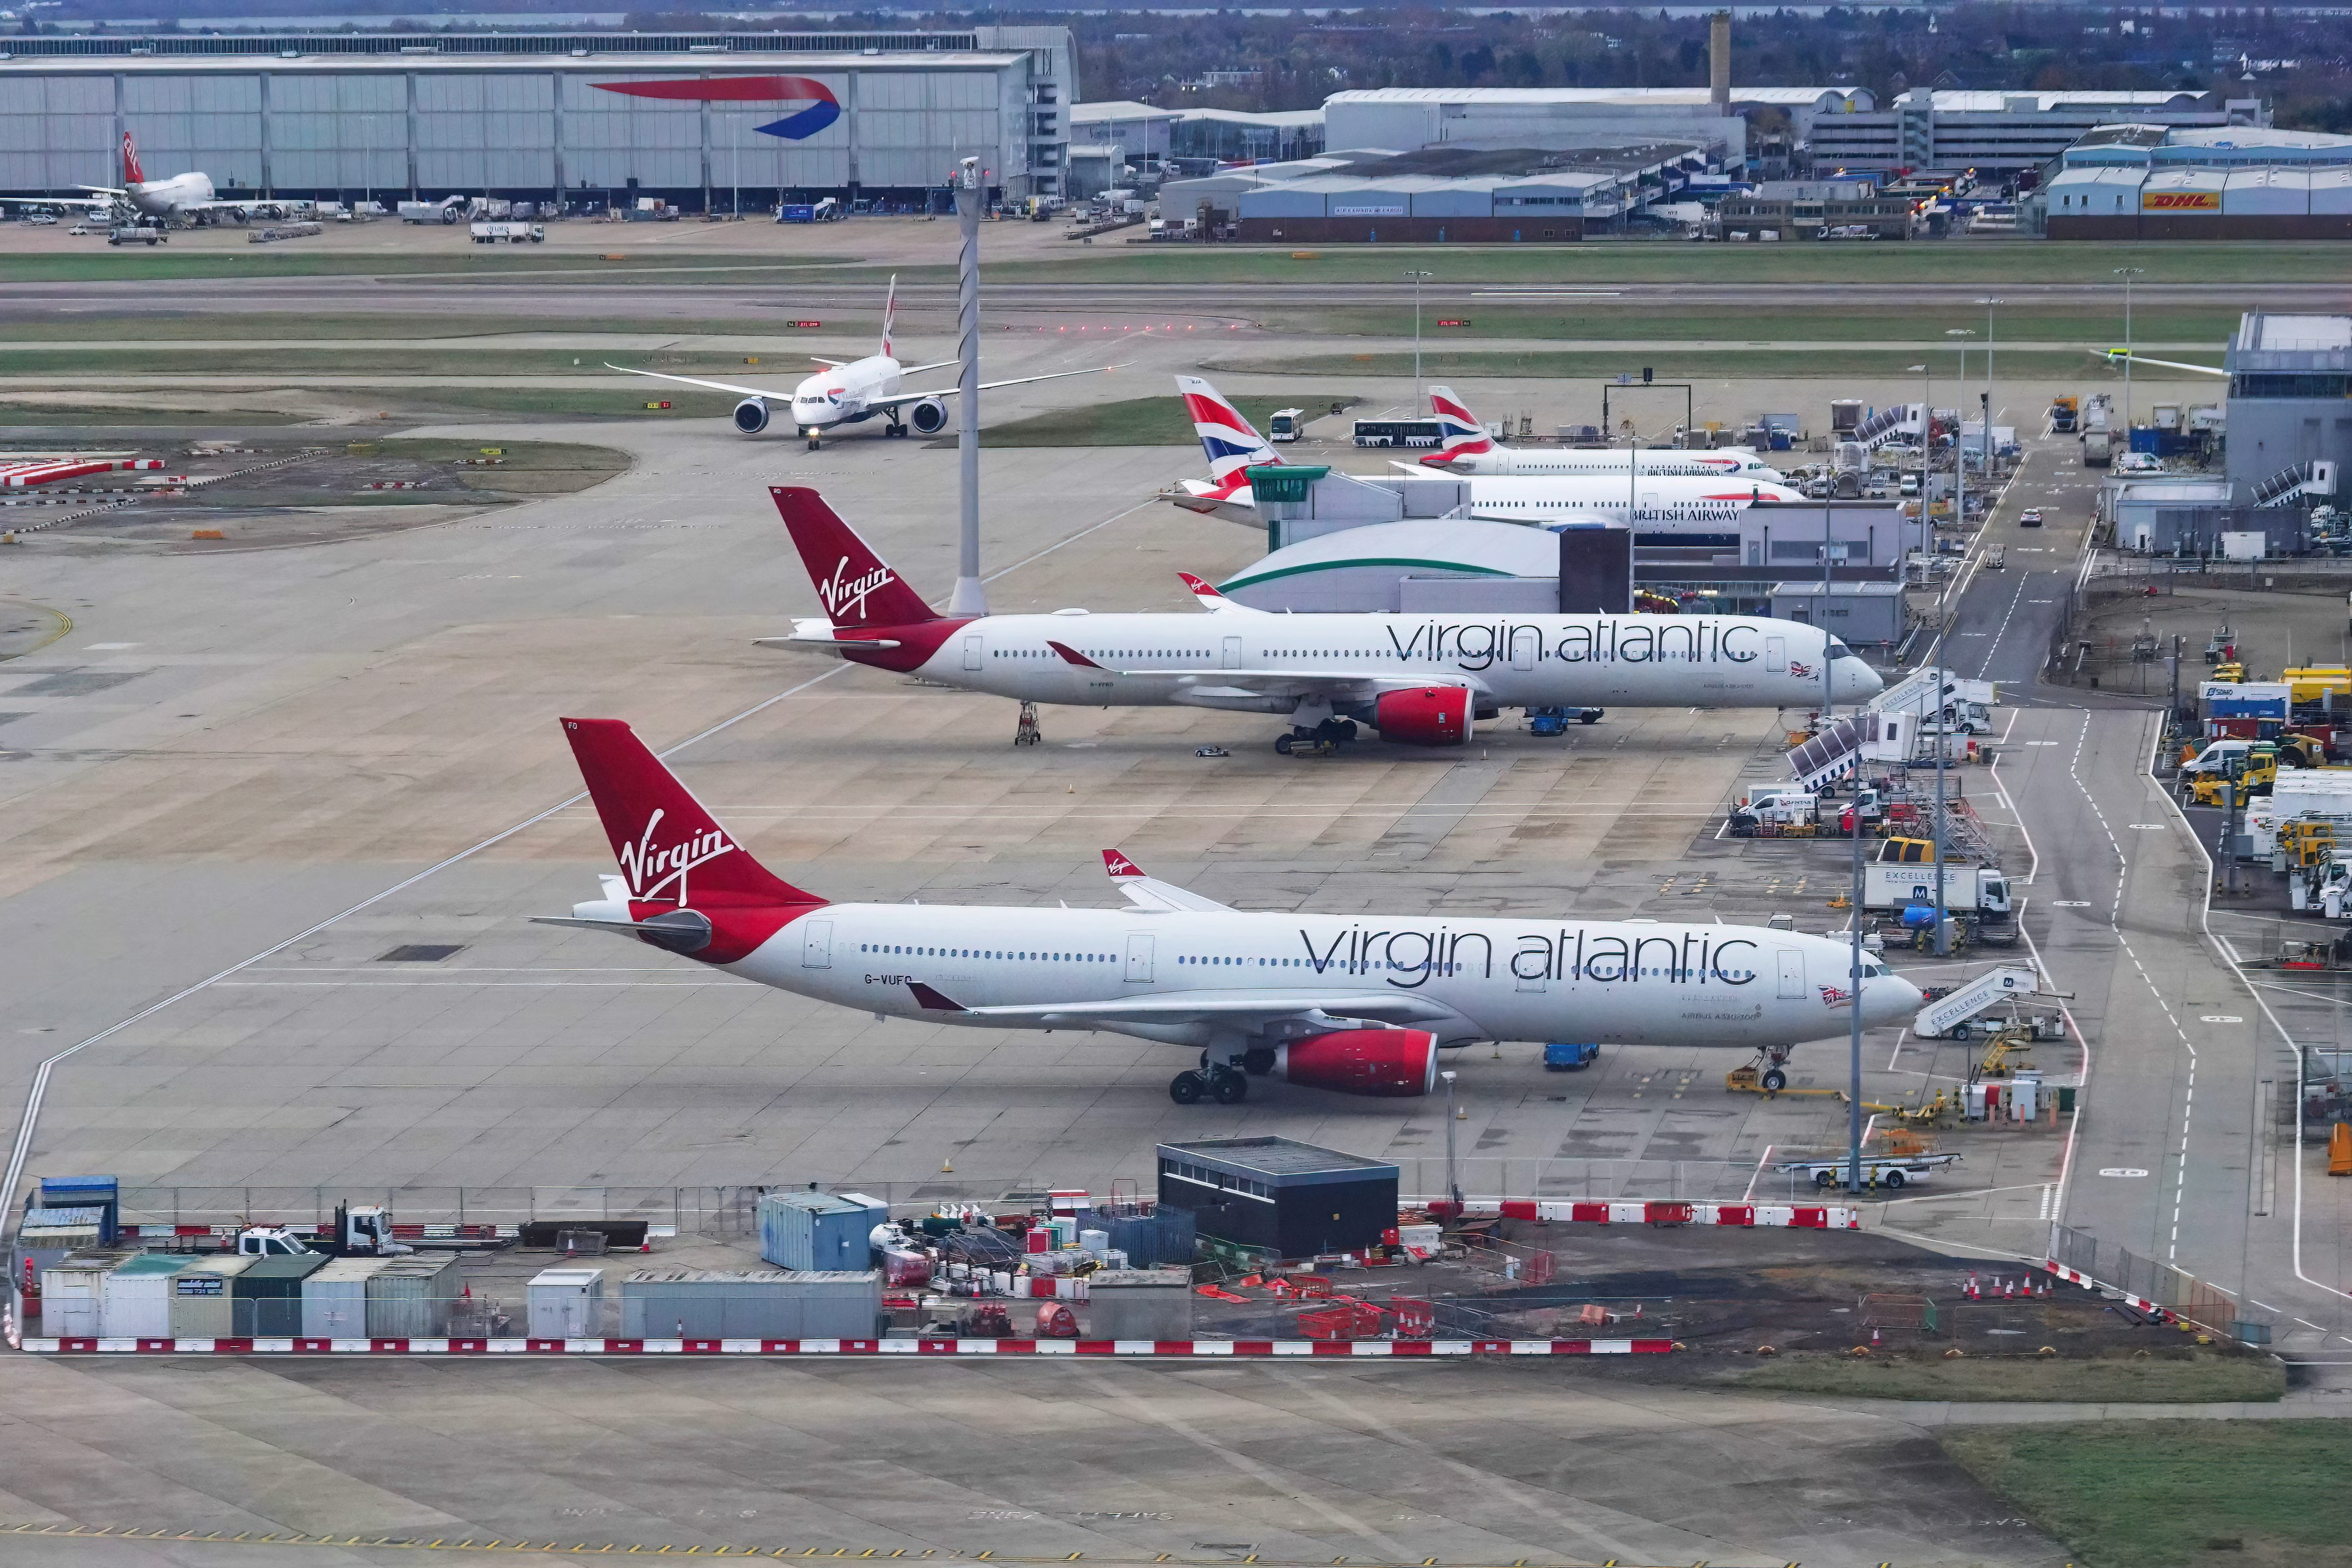 A high angle view of Virgin Atlantic and British Airways aircraft on the ground at London Heathrow airport.